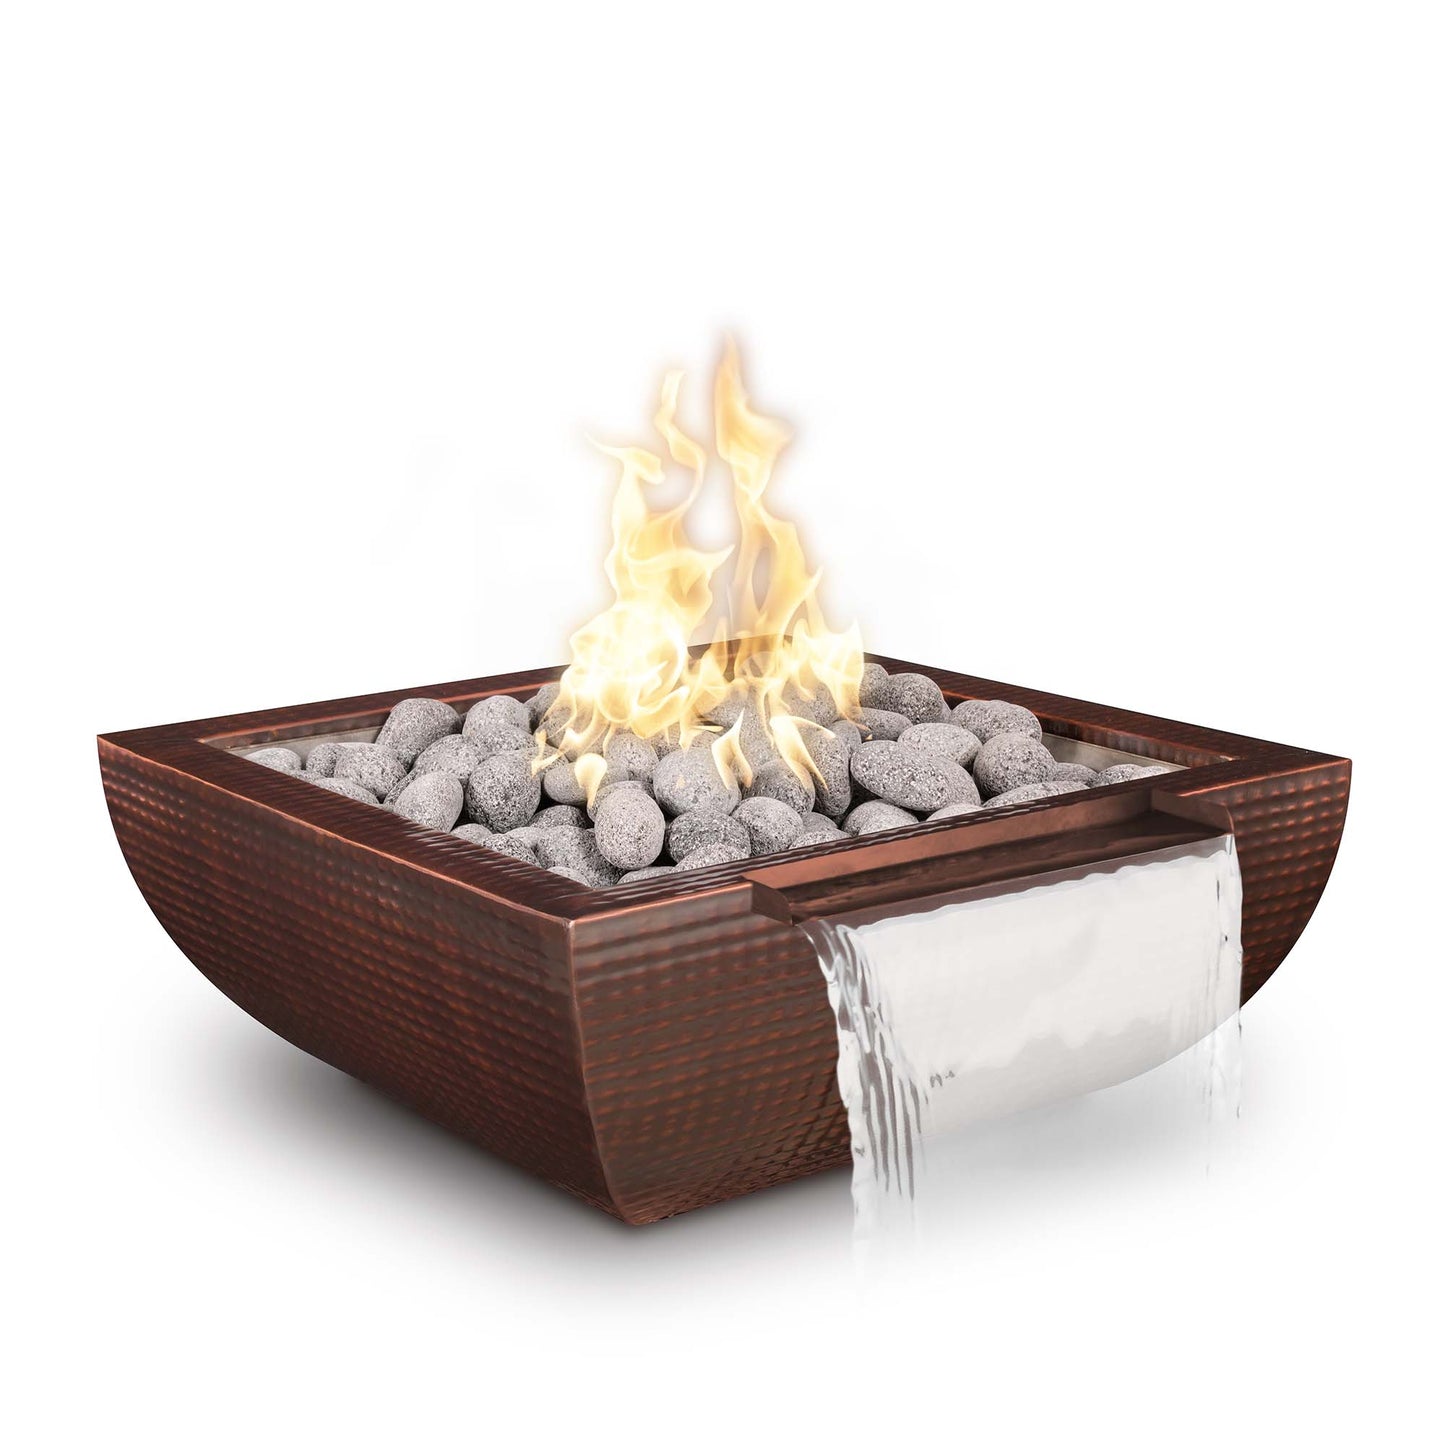 The Outdoor Plus Avalon Wide Spill 24" White Powder Coated Metal Liquid Propane Fire & Water Bowl with Match Lit Ignition